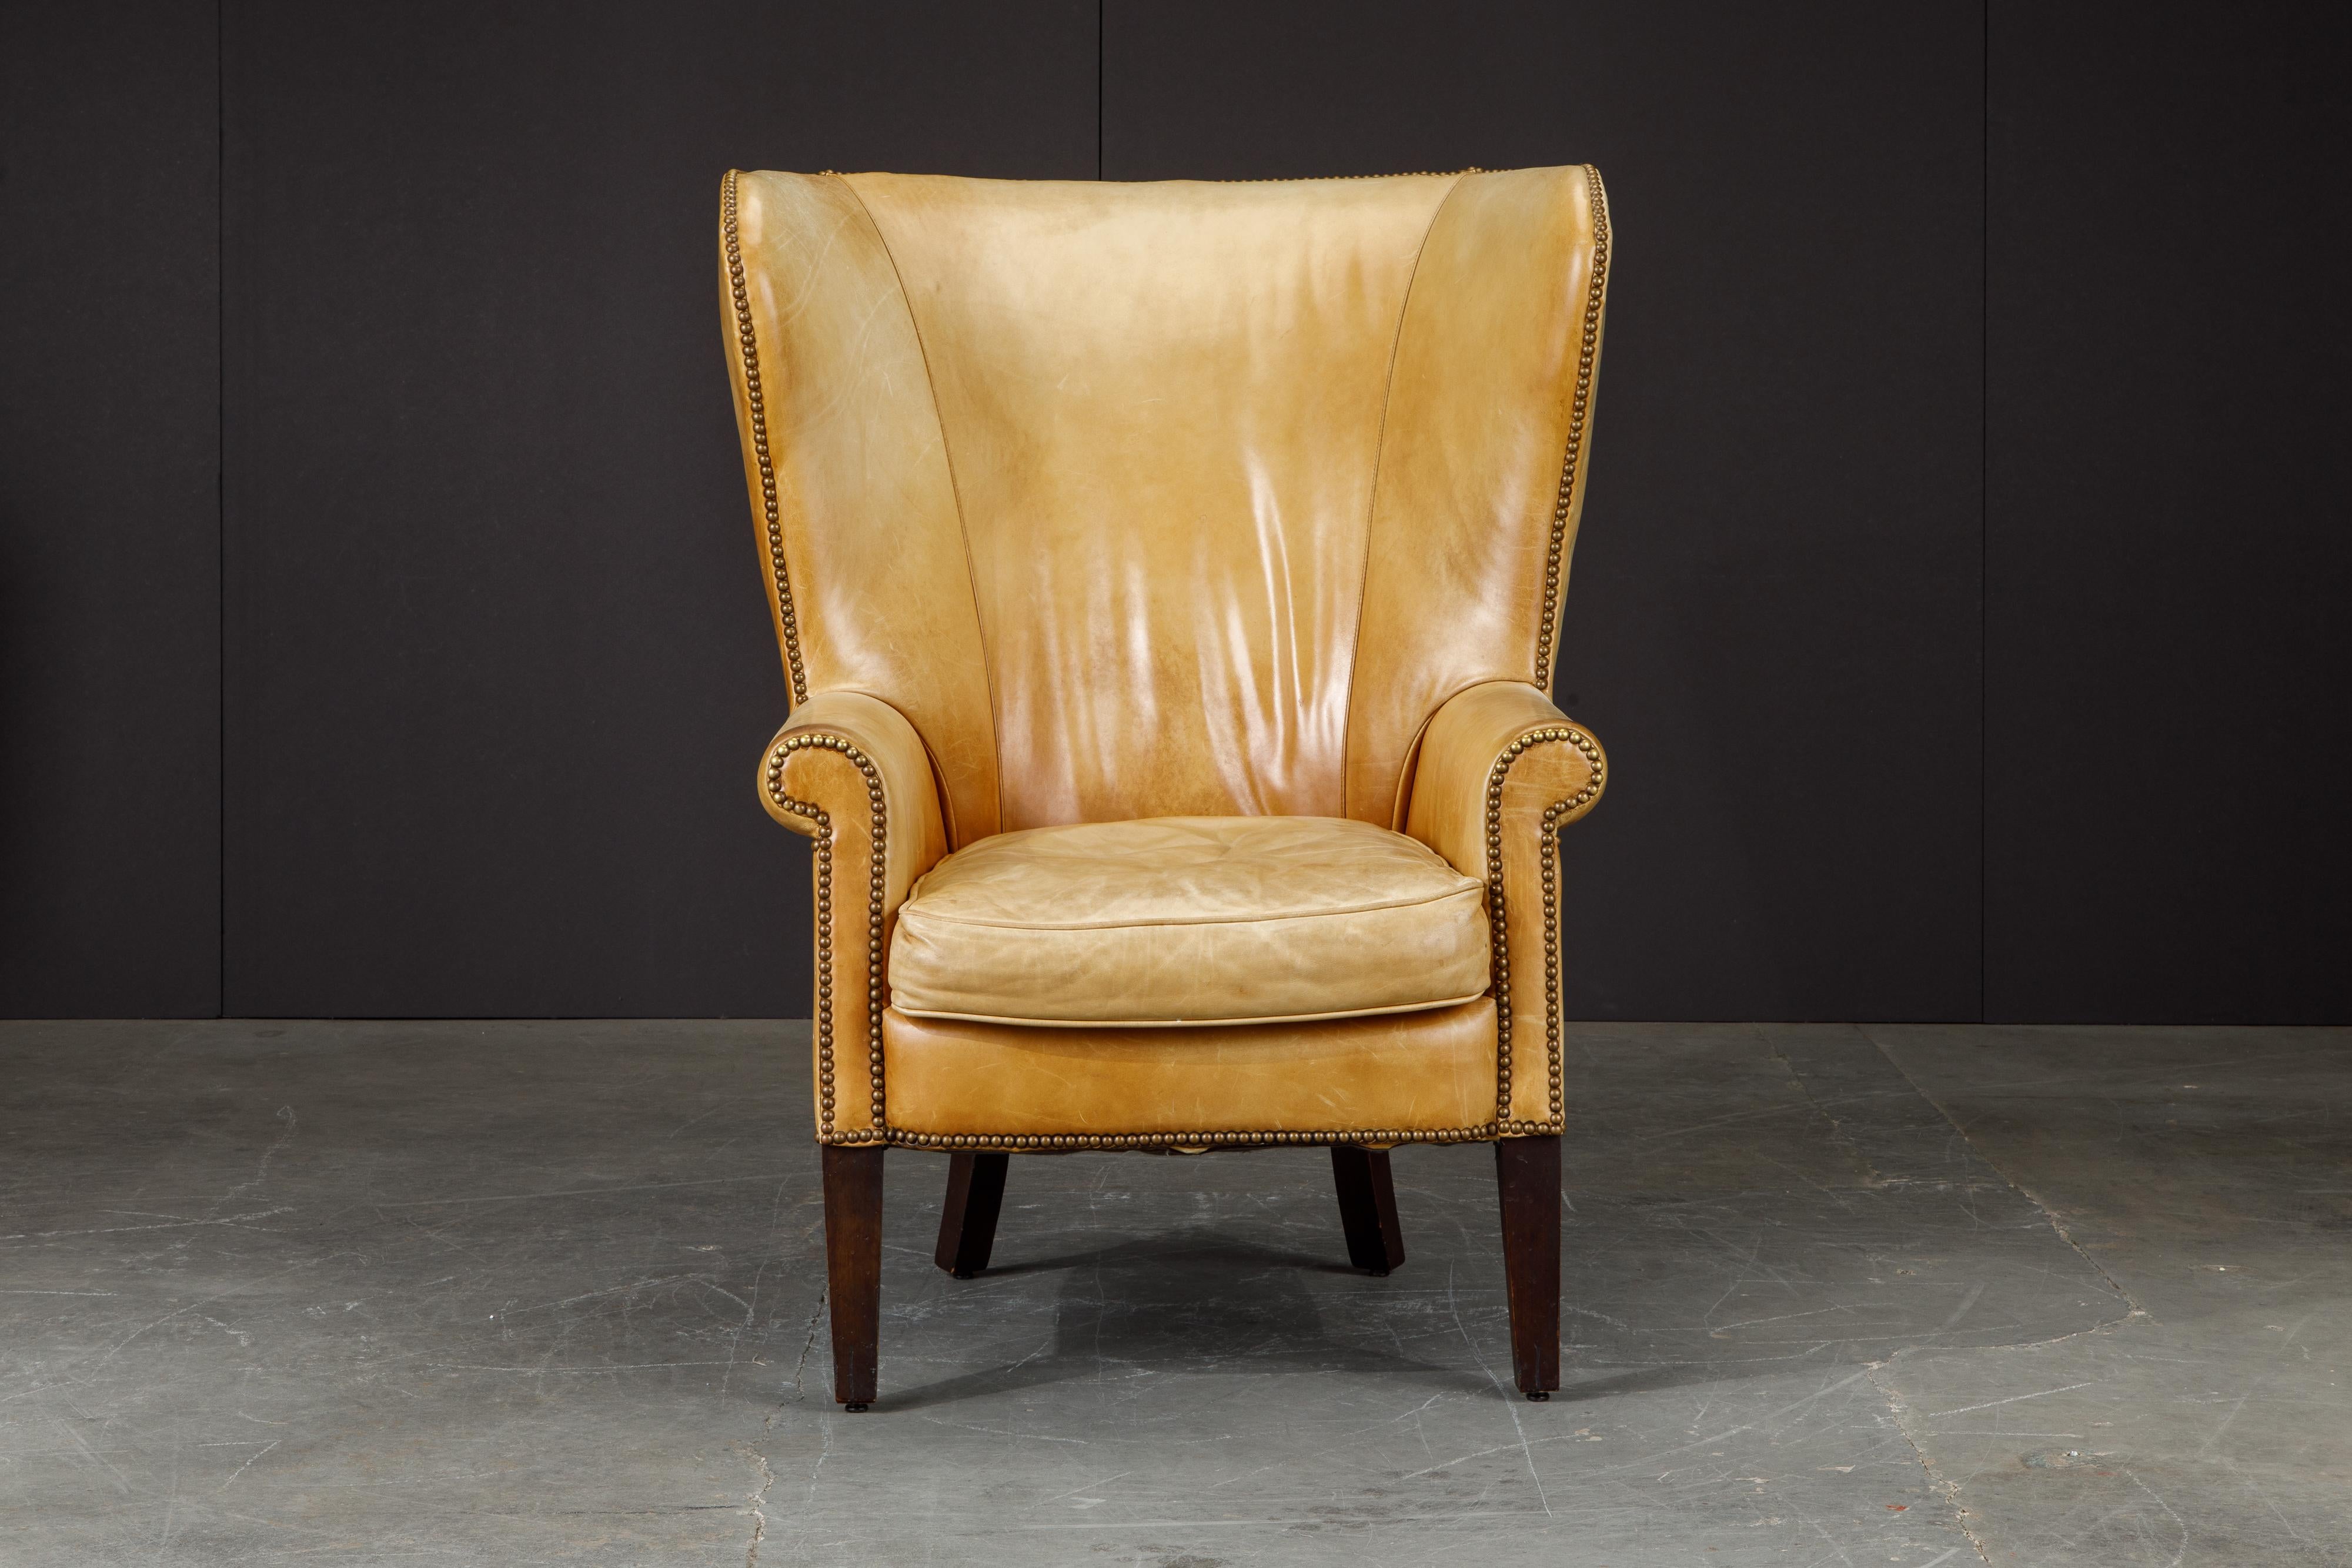 This gorgeous wingback club chair by Henredon for Ralph Lauren has such incredible lightly to moderately patinated leather, very thick and quality natural hides were used in it's making. 

The striking large scale wingback silhouette is iconic,